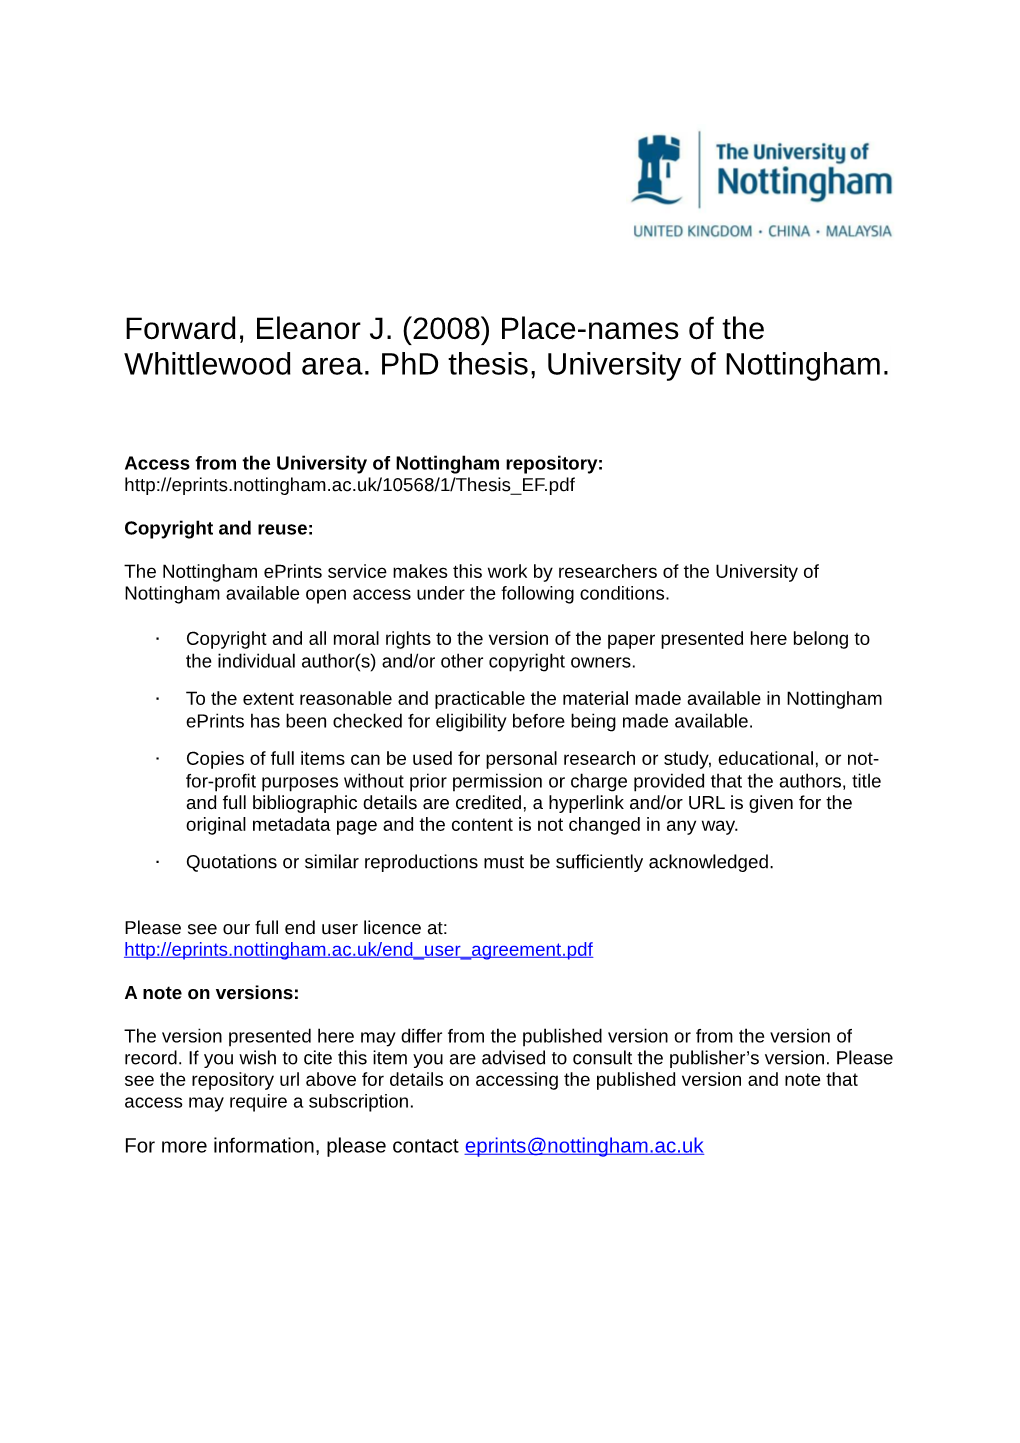 Place-Names of the Whittlewood Area. Phd Thesis, University of Nottingham